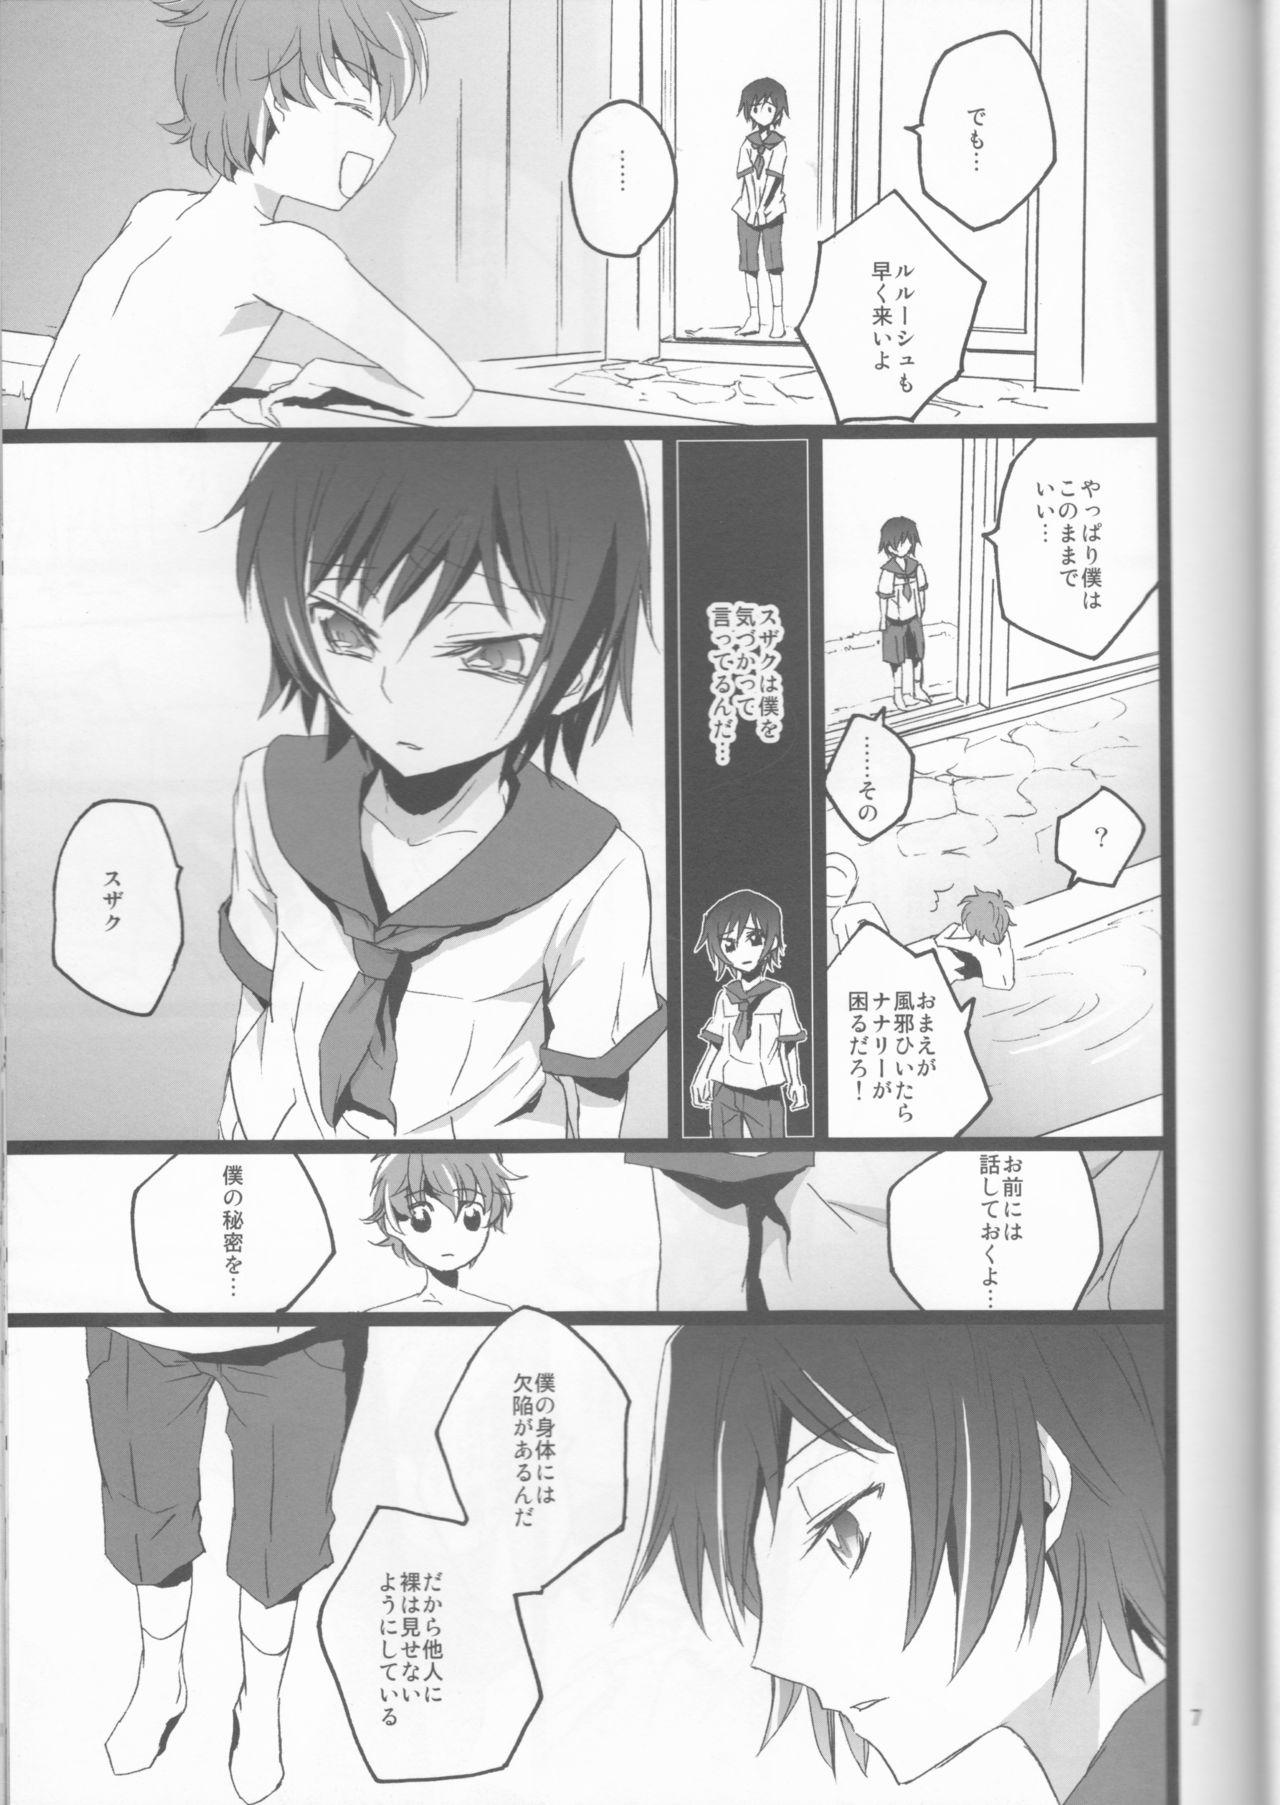 Pale Chameleon Girl - Code geass Gay Shorthair - Page 7